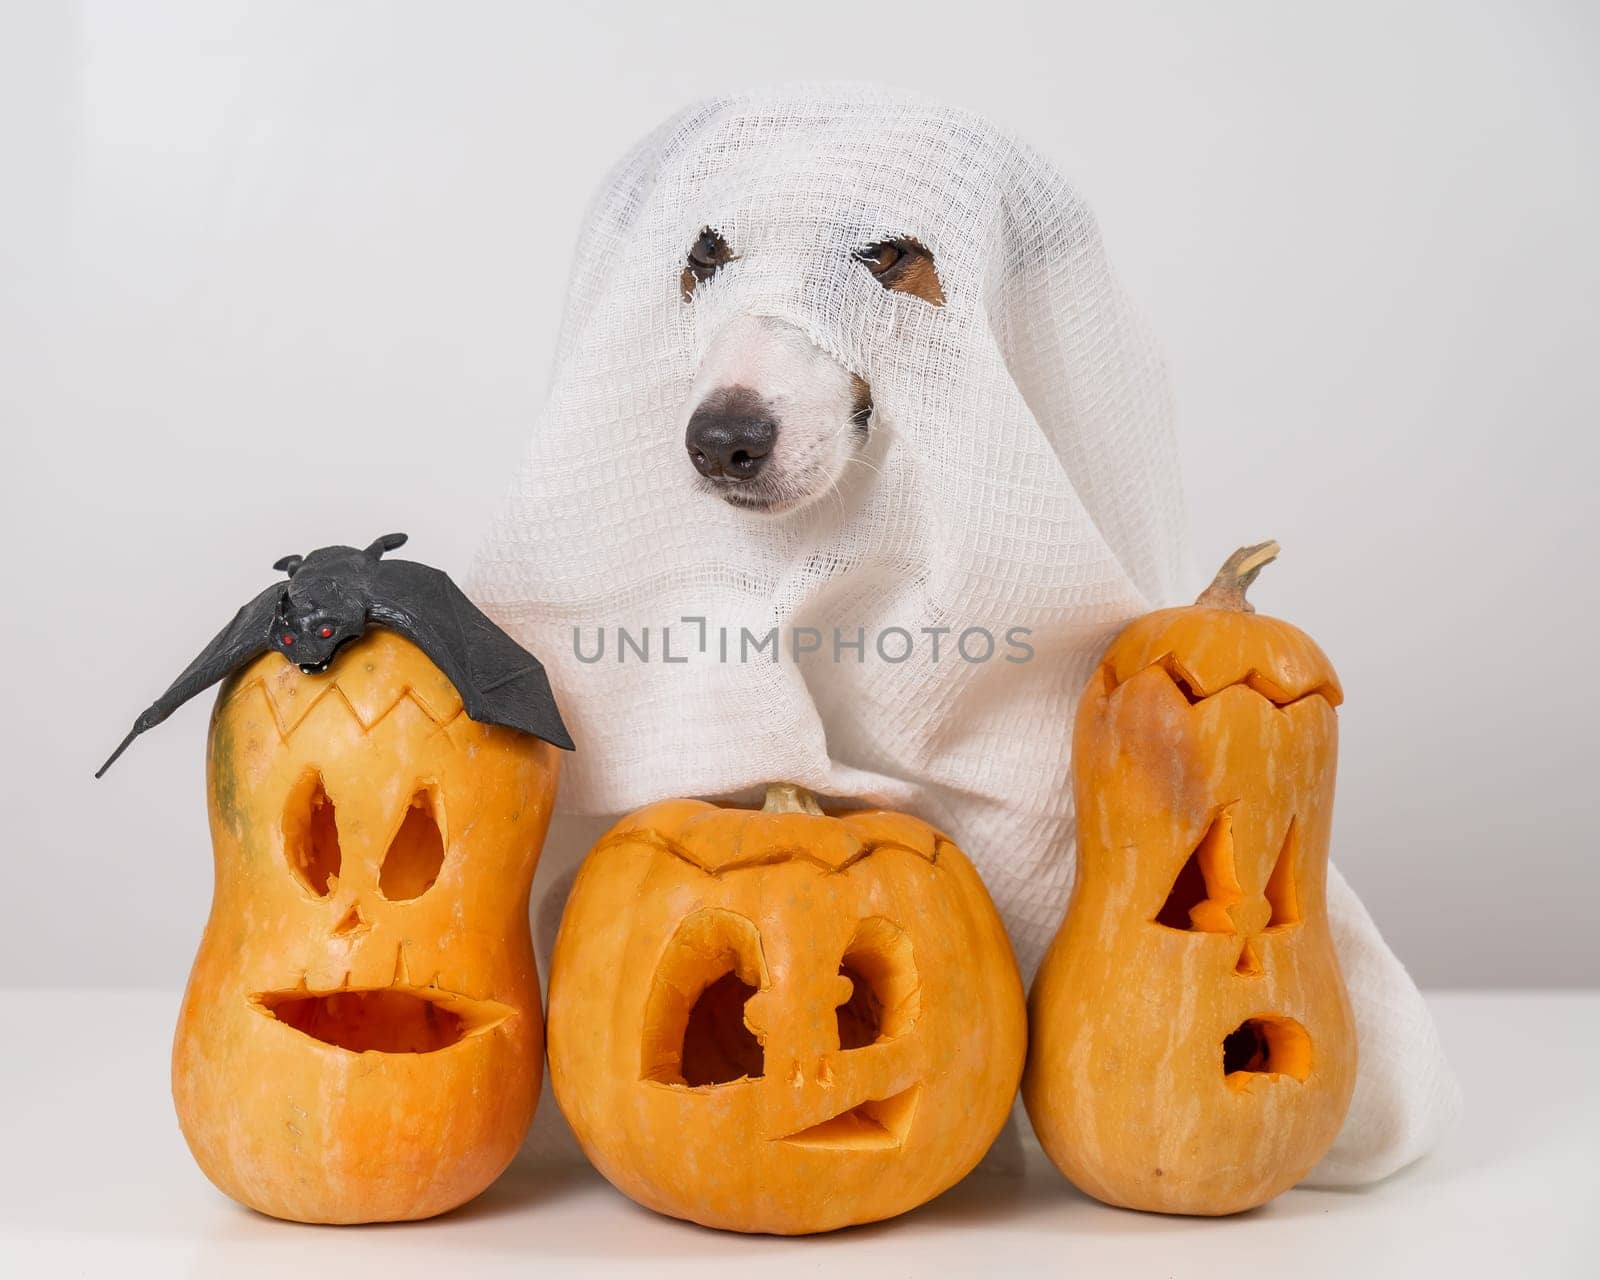 Jack Russell Terrier dog in a ghost costume and three jack-o-lanterns on a white background